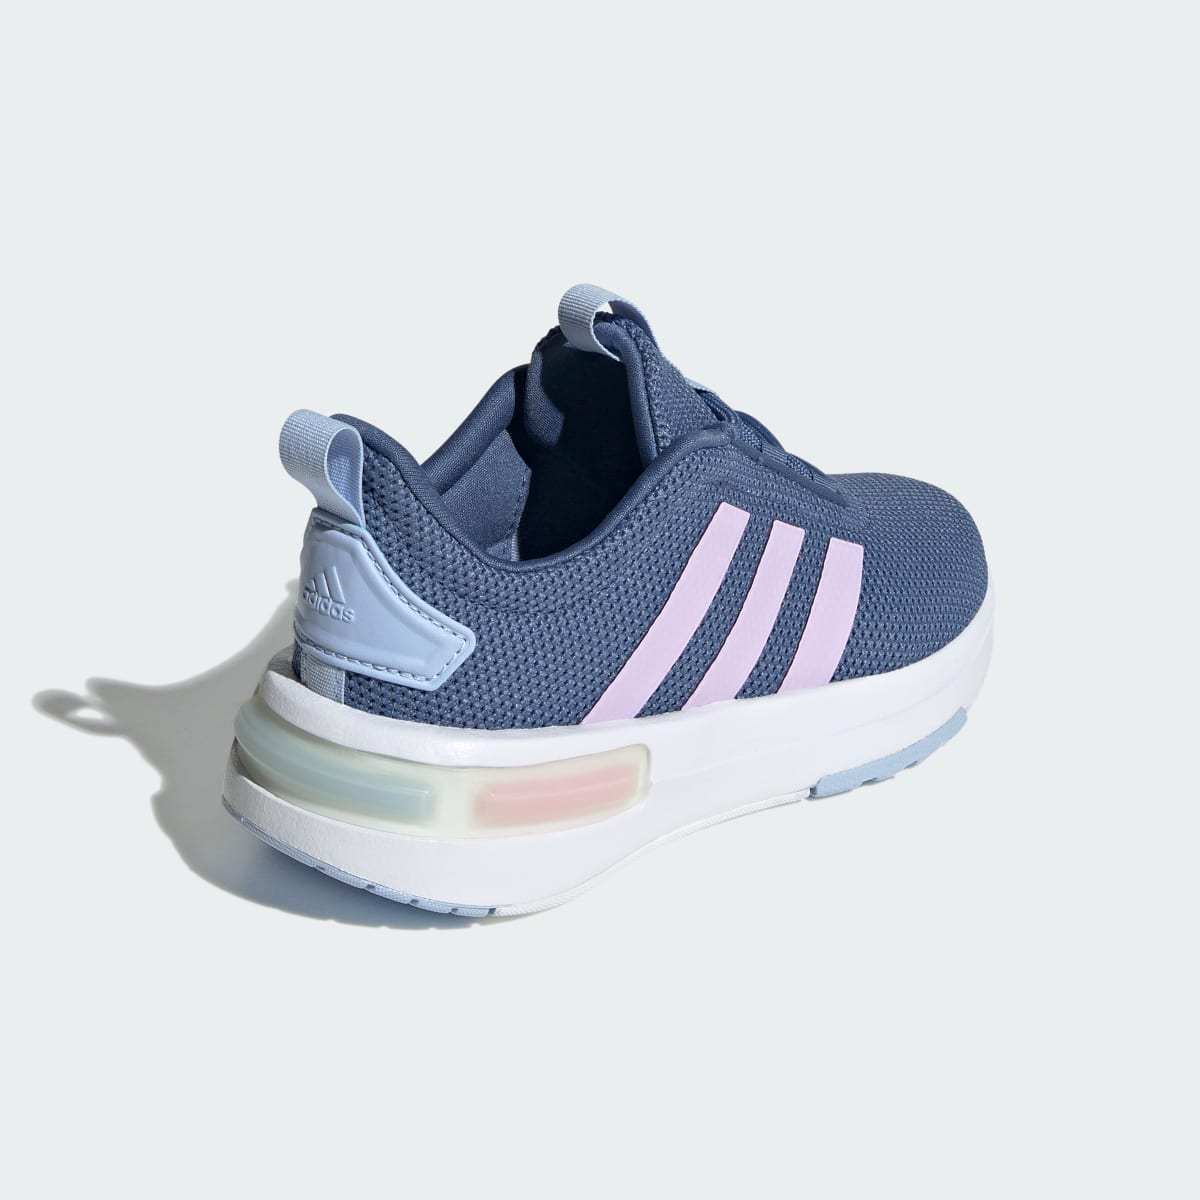 Adidas Racer TR23 Wide Shoes Kids. 6